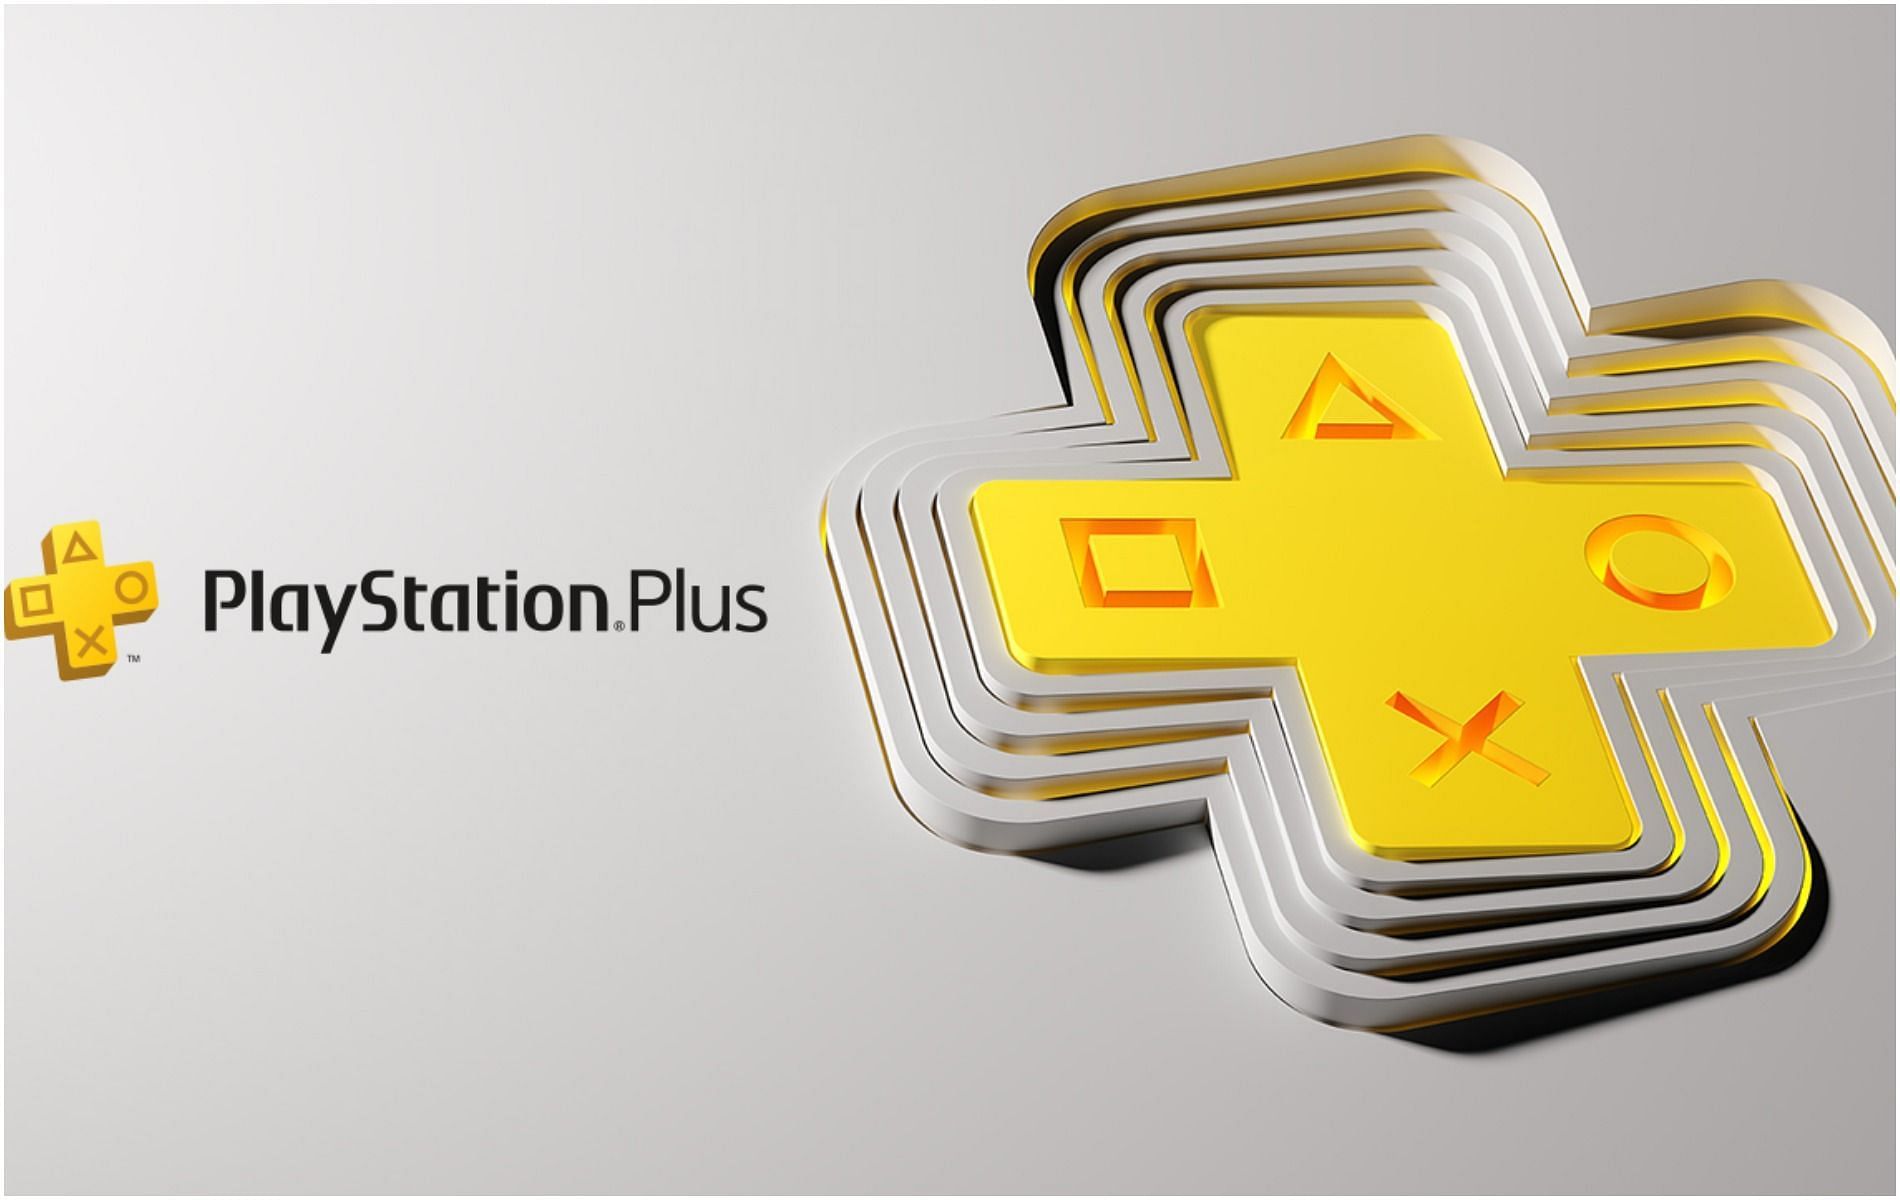 PlayStation Plus&rsquo; revamp is an answer to the Xbox Game Pass (Image via PlayStation)